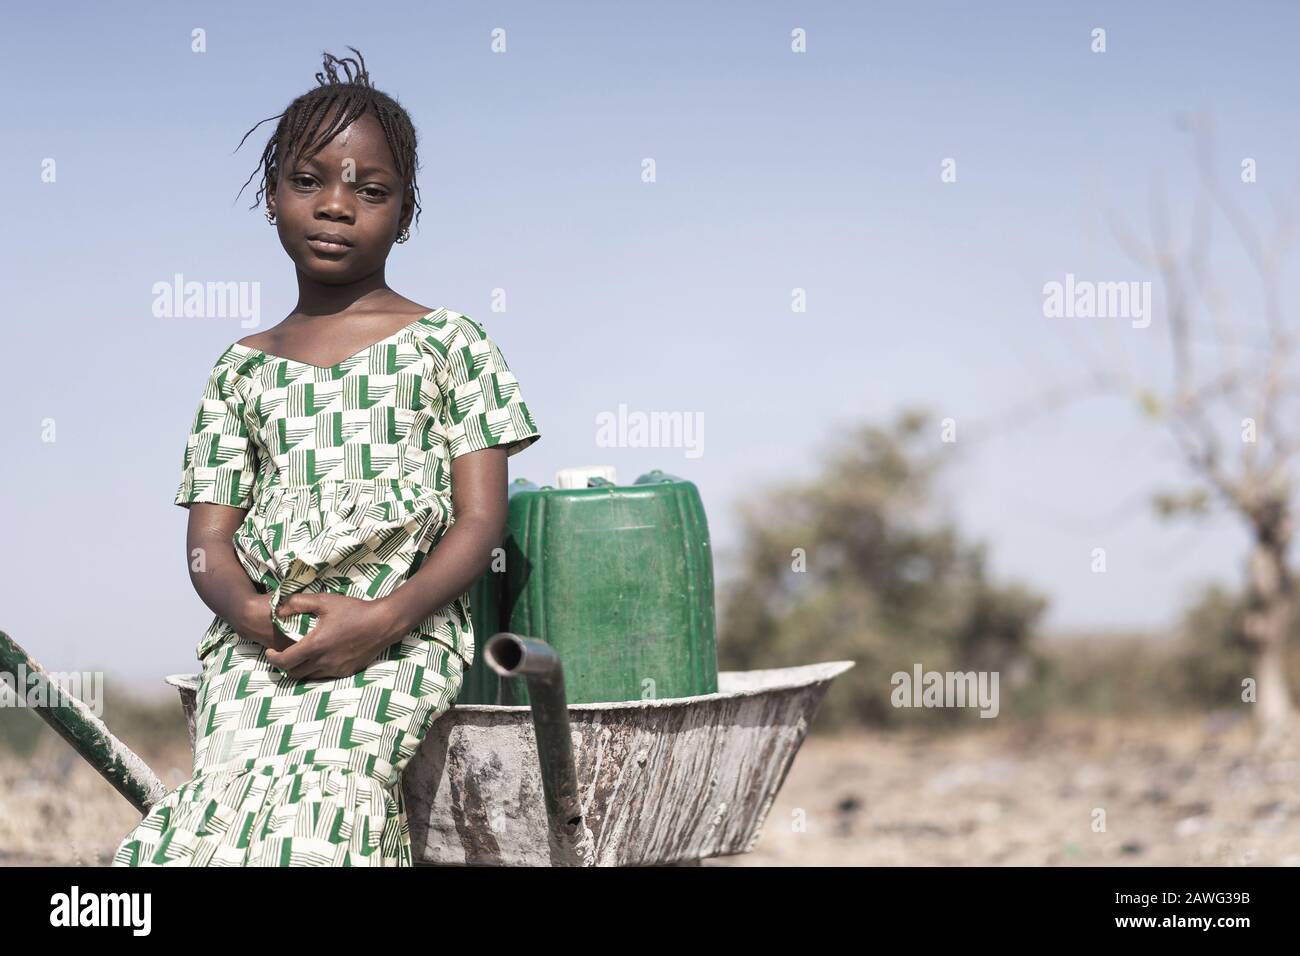 Working African ethnicity Infant getting pure Water in a natural environment Stock Photo